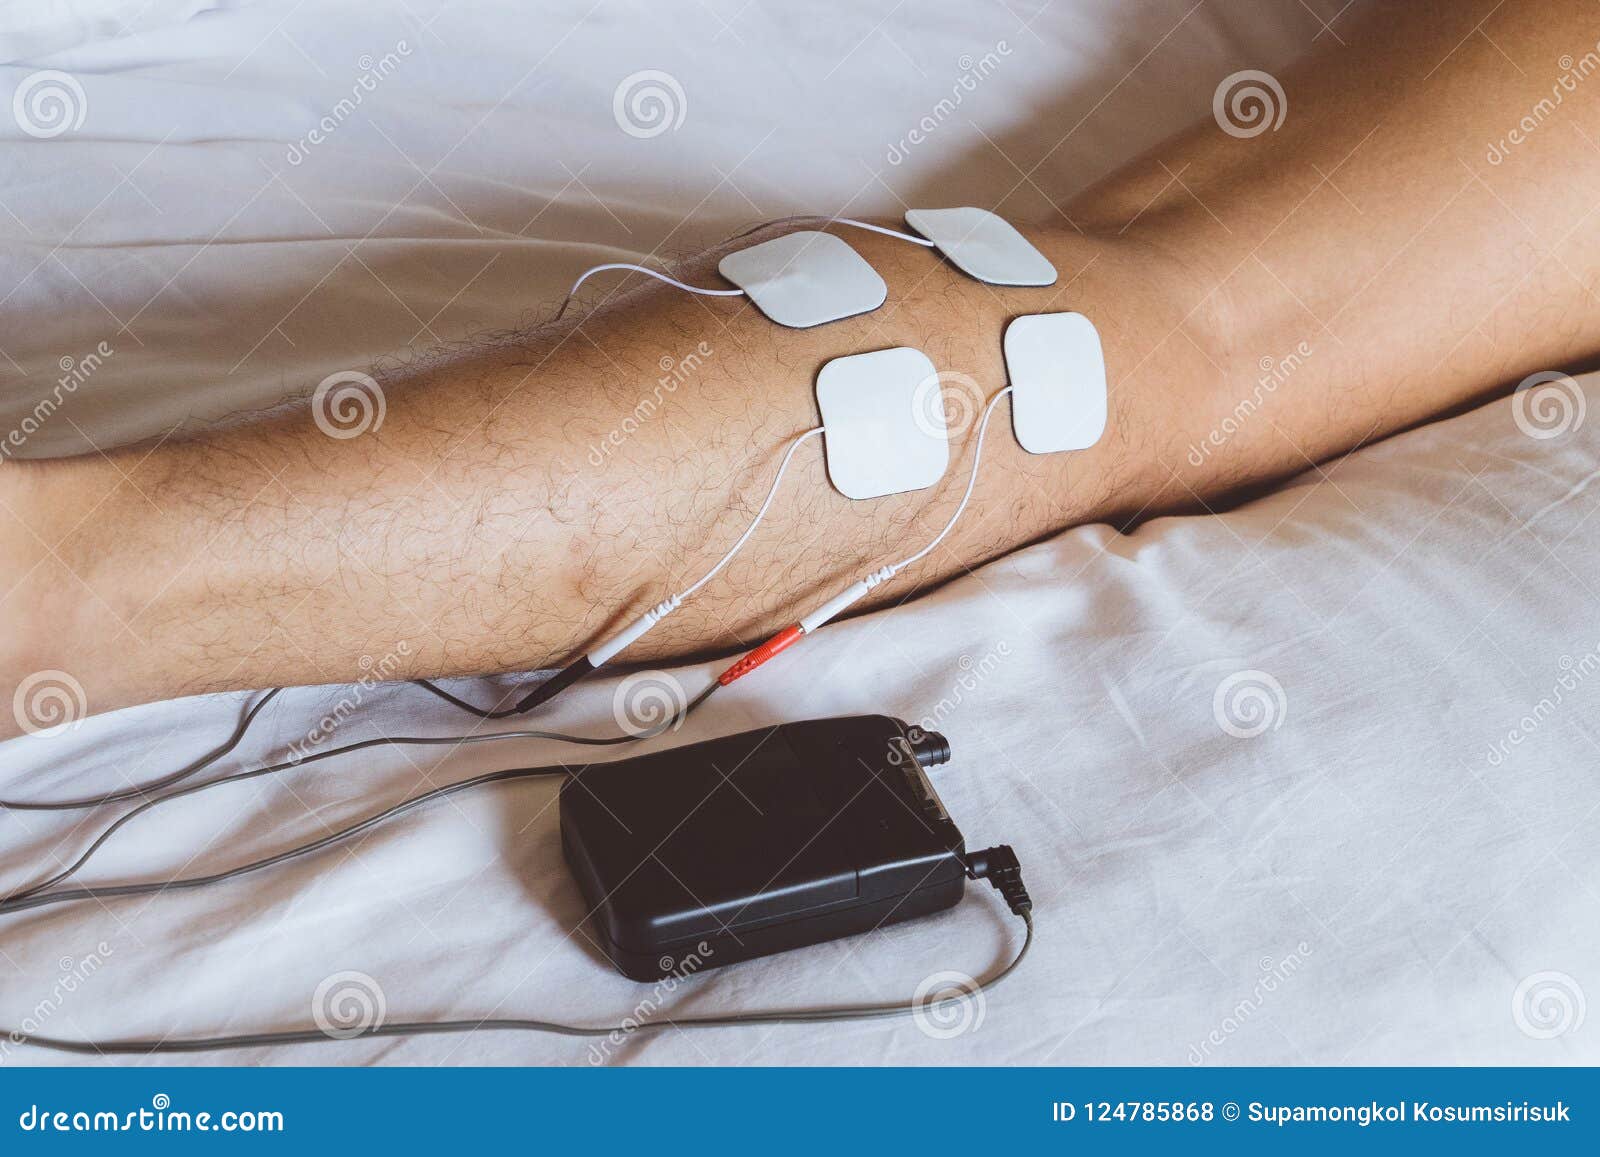 patient applying electrical stimulation